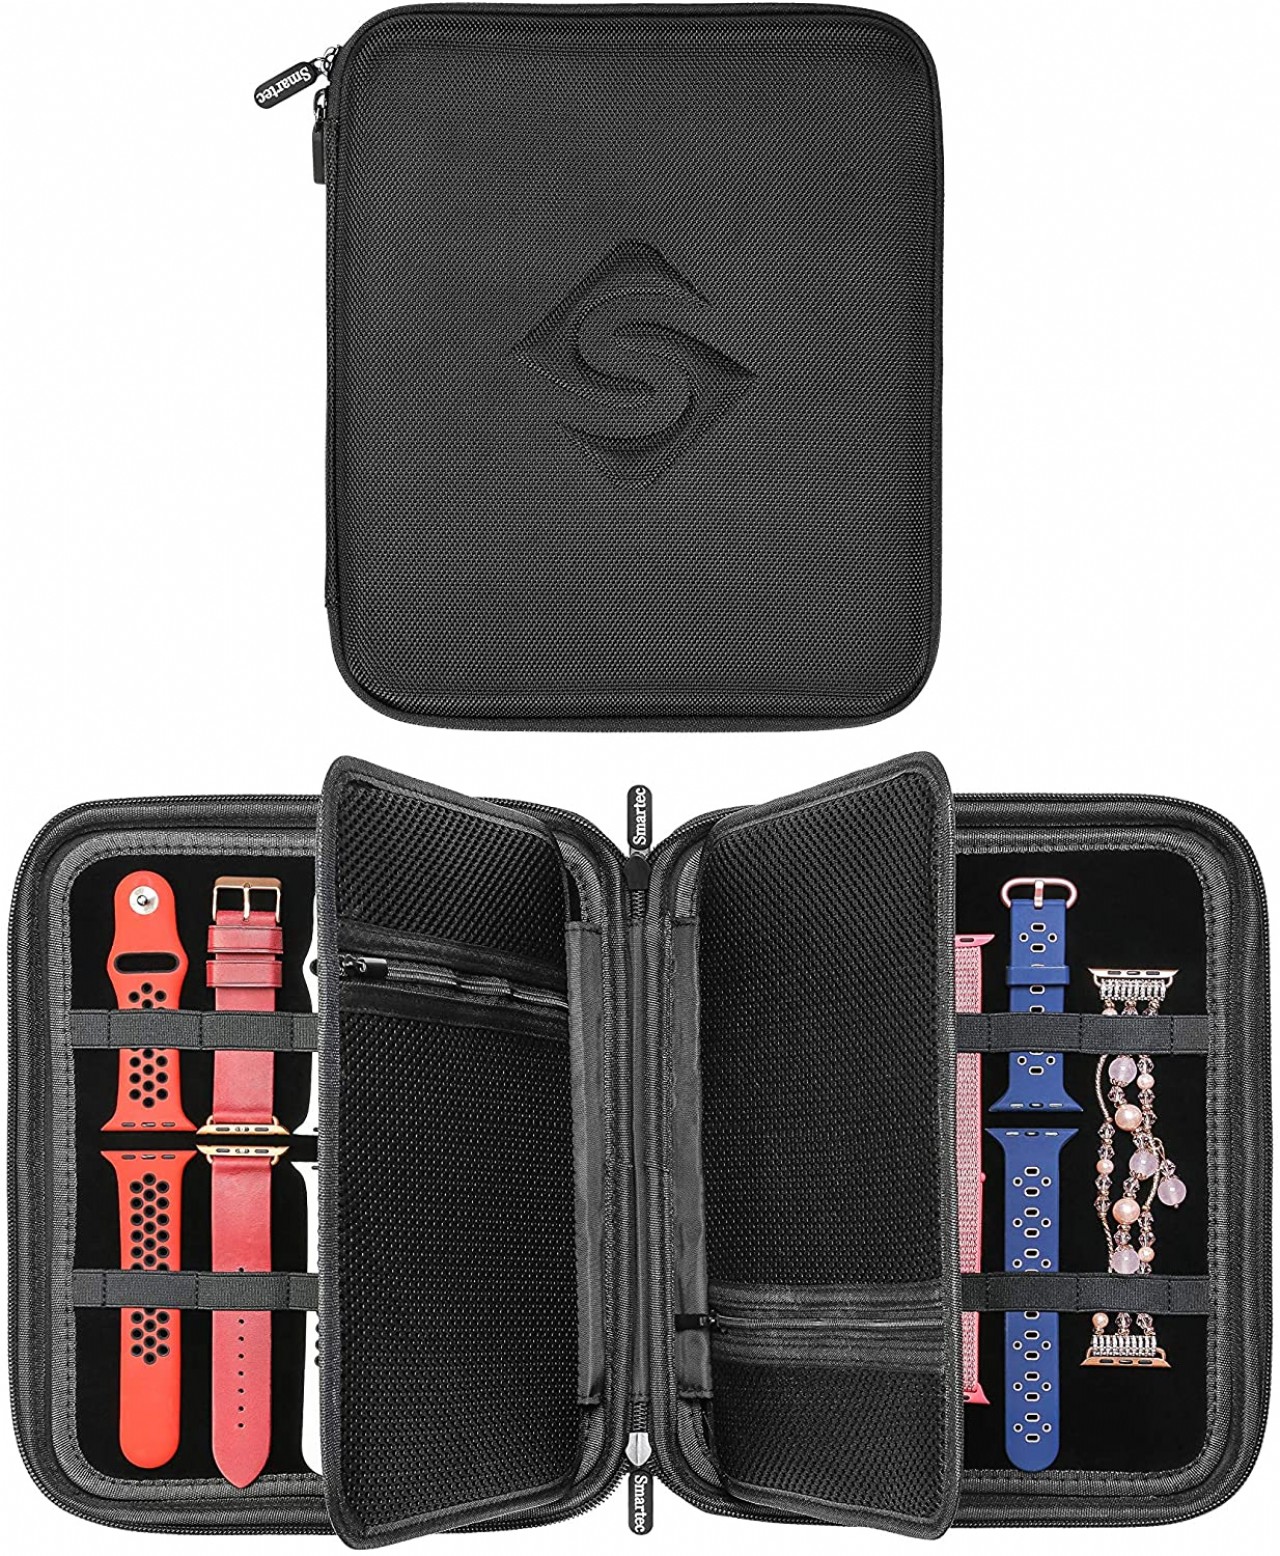 Smart Watch Bands & Accessories Travel/Storage Case, Stores 10+ Bands, Compatible for All Series